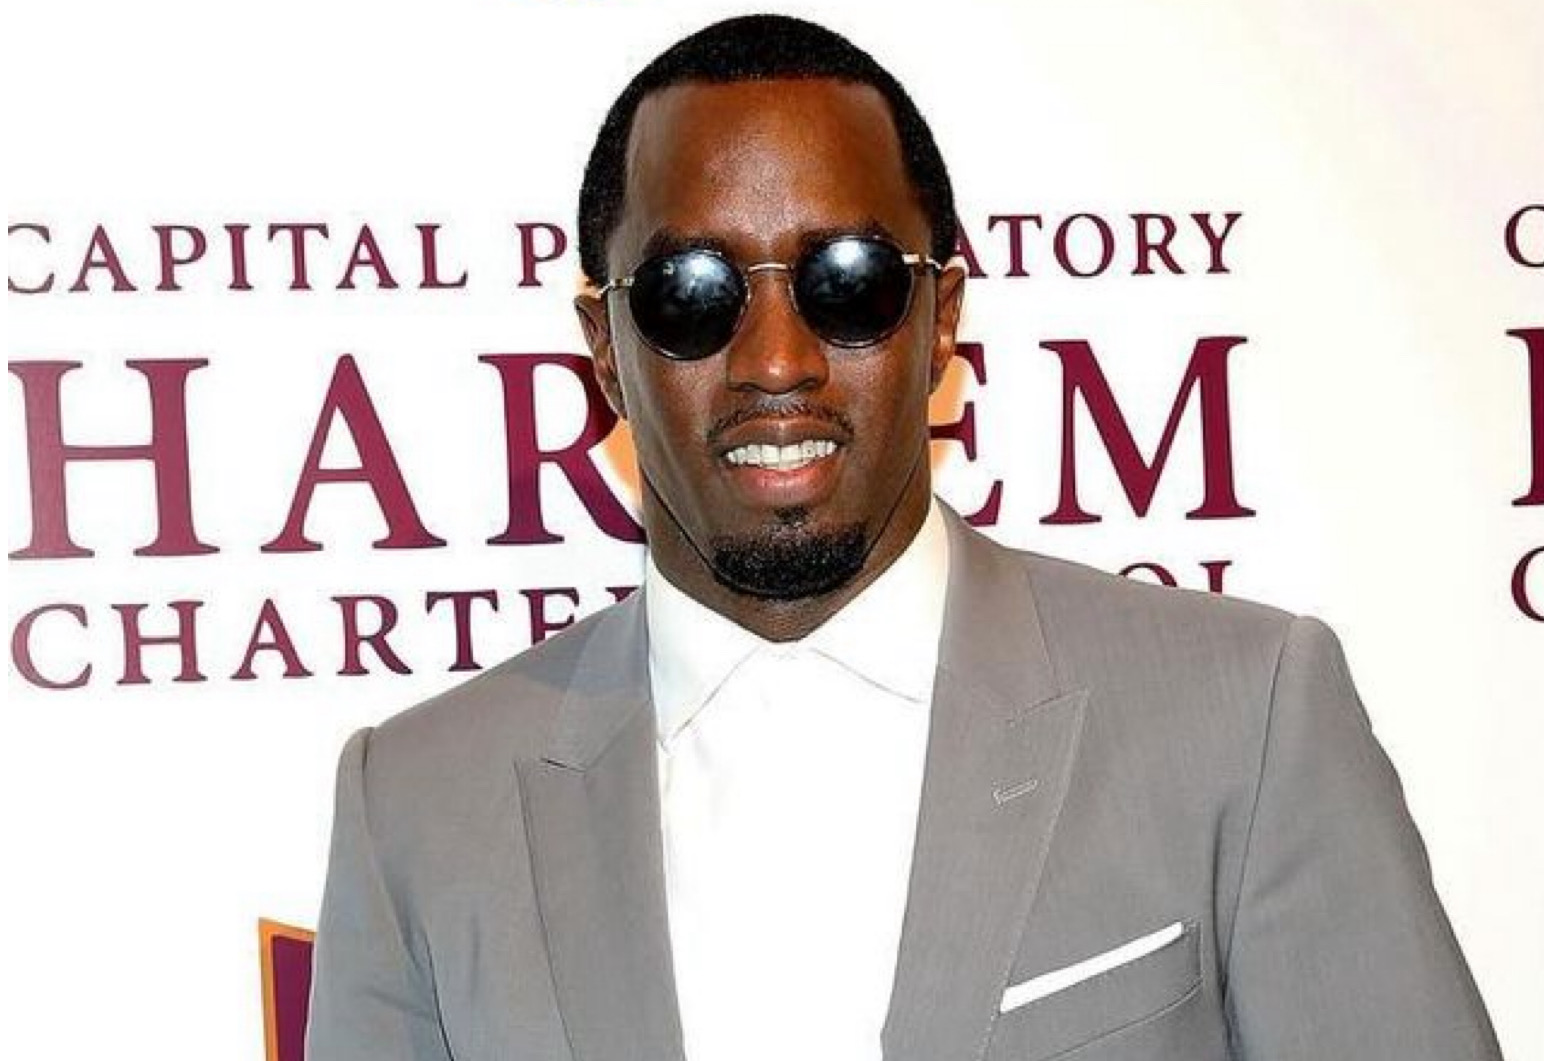 Capital preparatory charter schools announces the end of their partnership with Diddy amid s3xaul assault�accusations